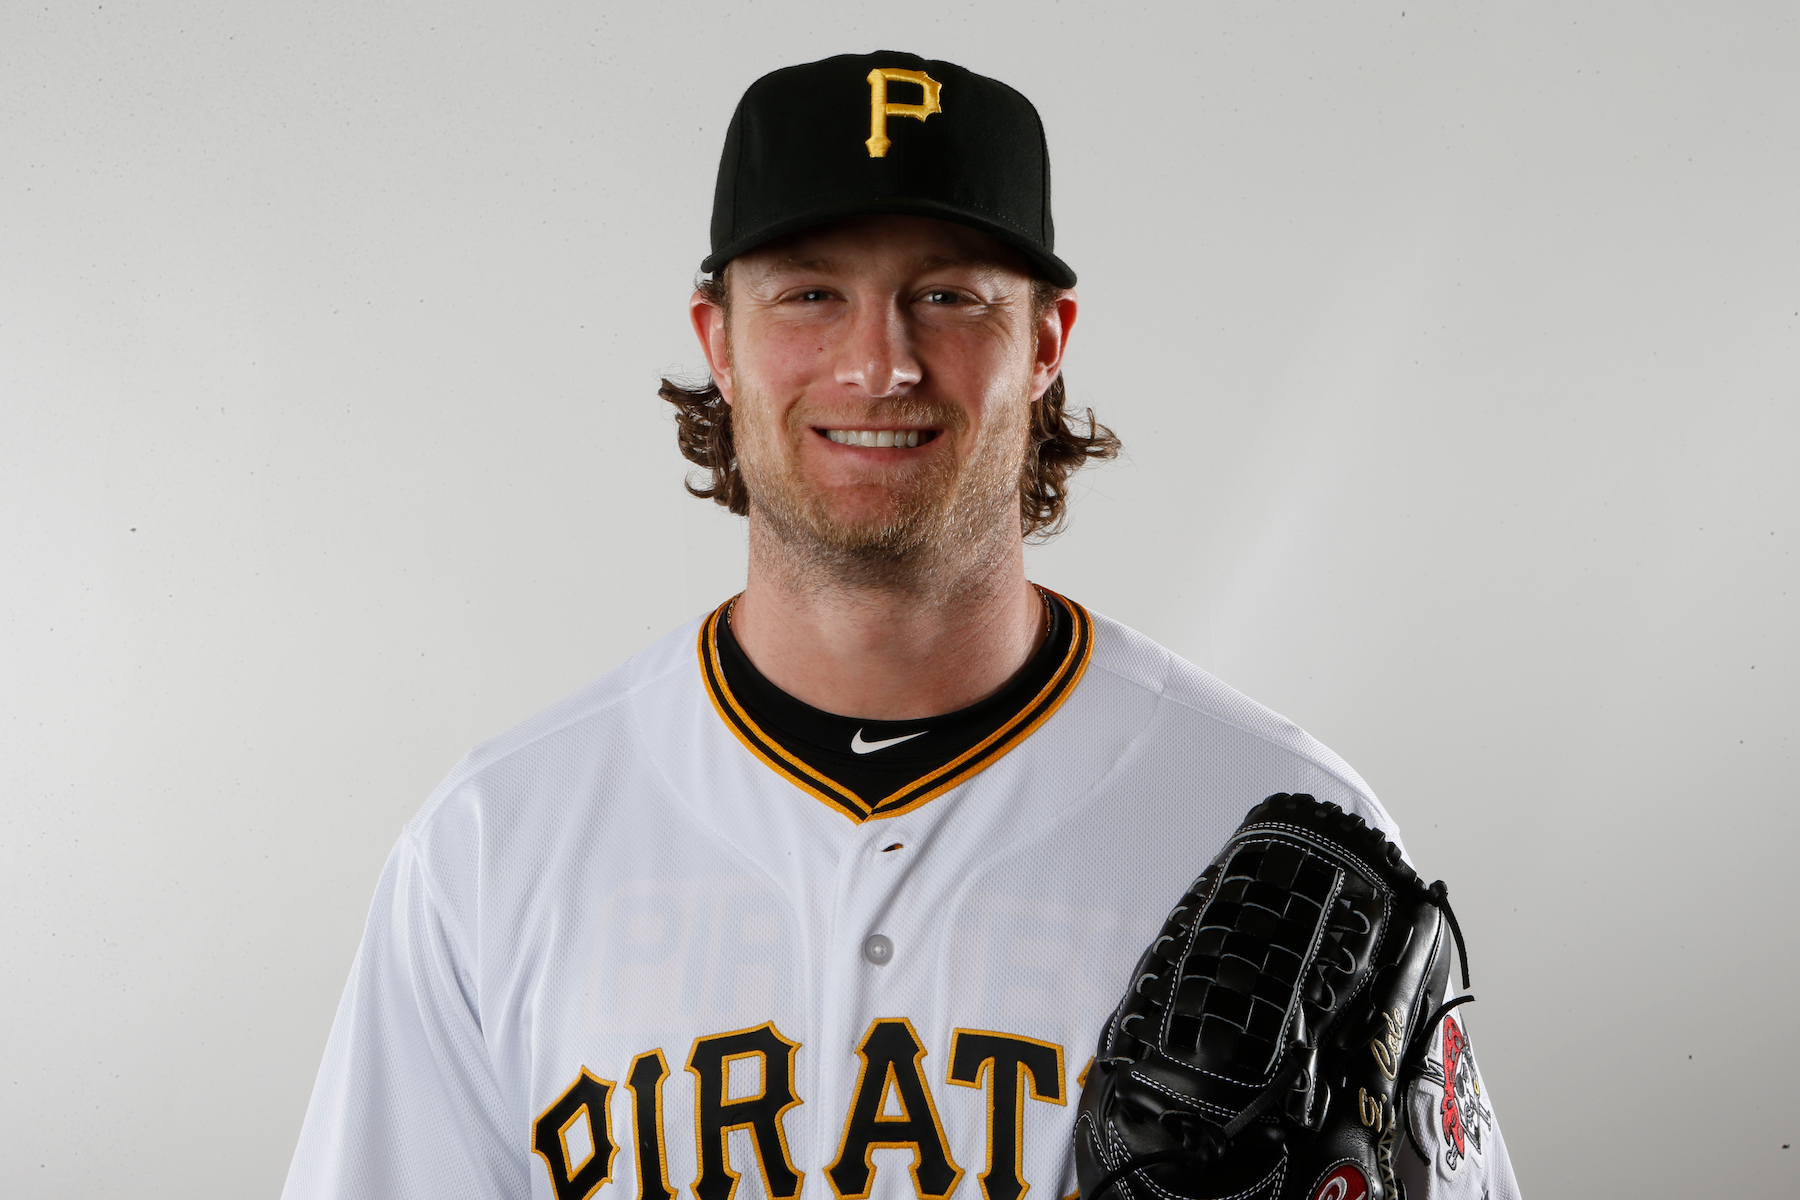 Gerrit Cole had his 2020 salary cut by more than half, but he's still set to make more than his old team's entire roster.